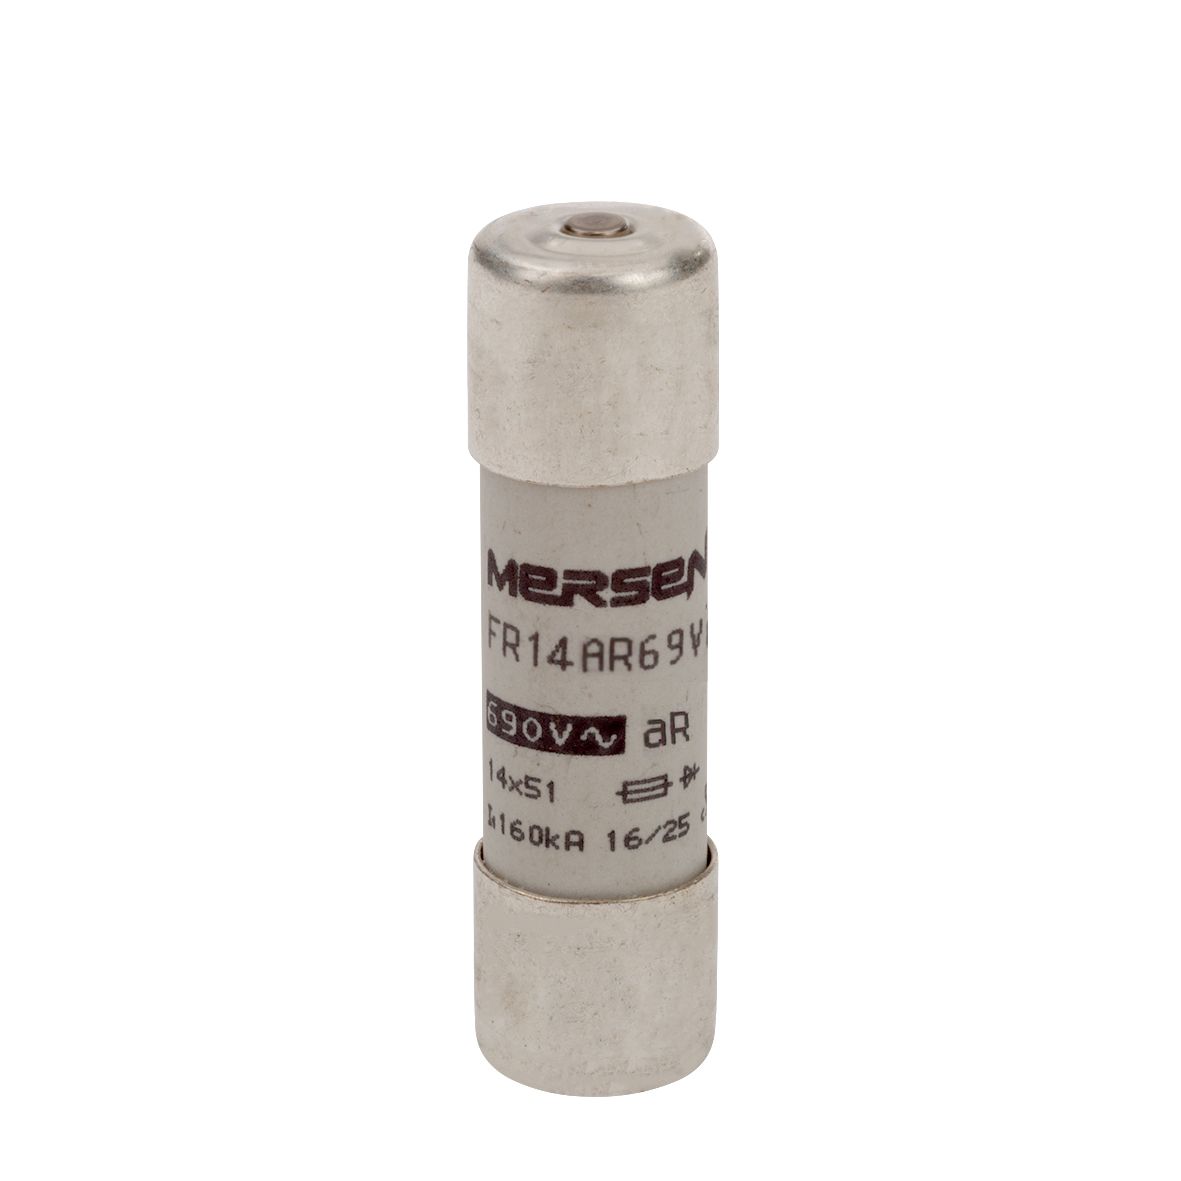 R1056658 - Cylindrical fuse-link aR 690VAC 14x51, 10A, with indicator